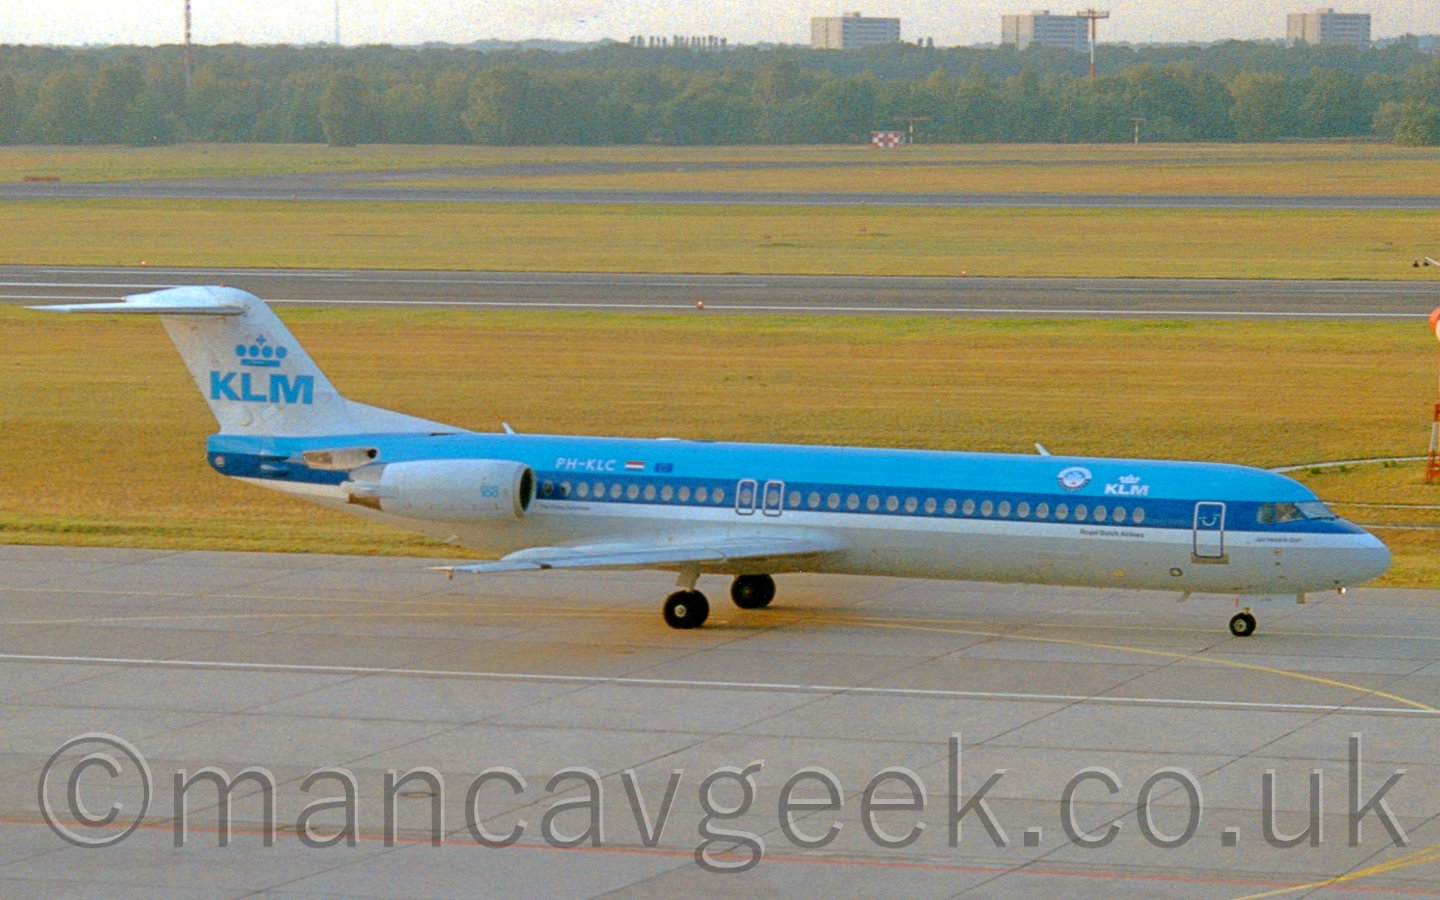 Side view of a twin engined jet airliner with the engines mounted on the rear fuselage taxiing from left to right. The plane has a grey belly and light blue top, with a thick dark blue and thin white stripe seperating the 2 sections. There are small "KLM" titles under a stylised white crown on the upper forward fuselage, with a larger blue "KLM" titles under a stylised blue crown on the tail. There are blue "Fokker 100" titles on the front of the engine pods. In the background, large grass areas are divided by black taxiways and runways, leading off to ranks of trees at the airfield perimeter.